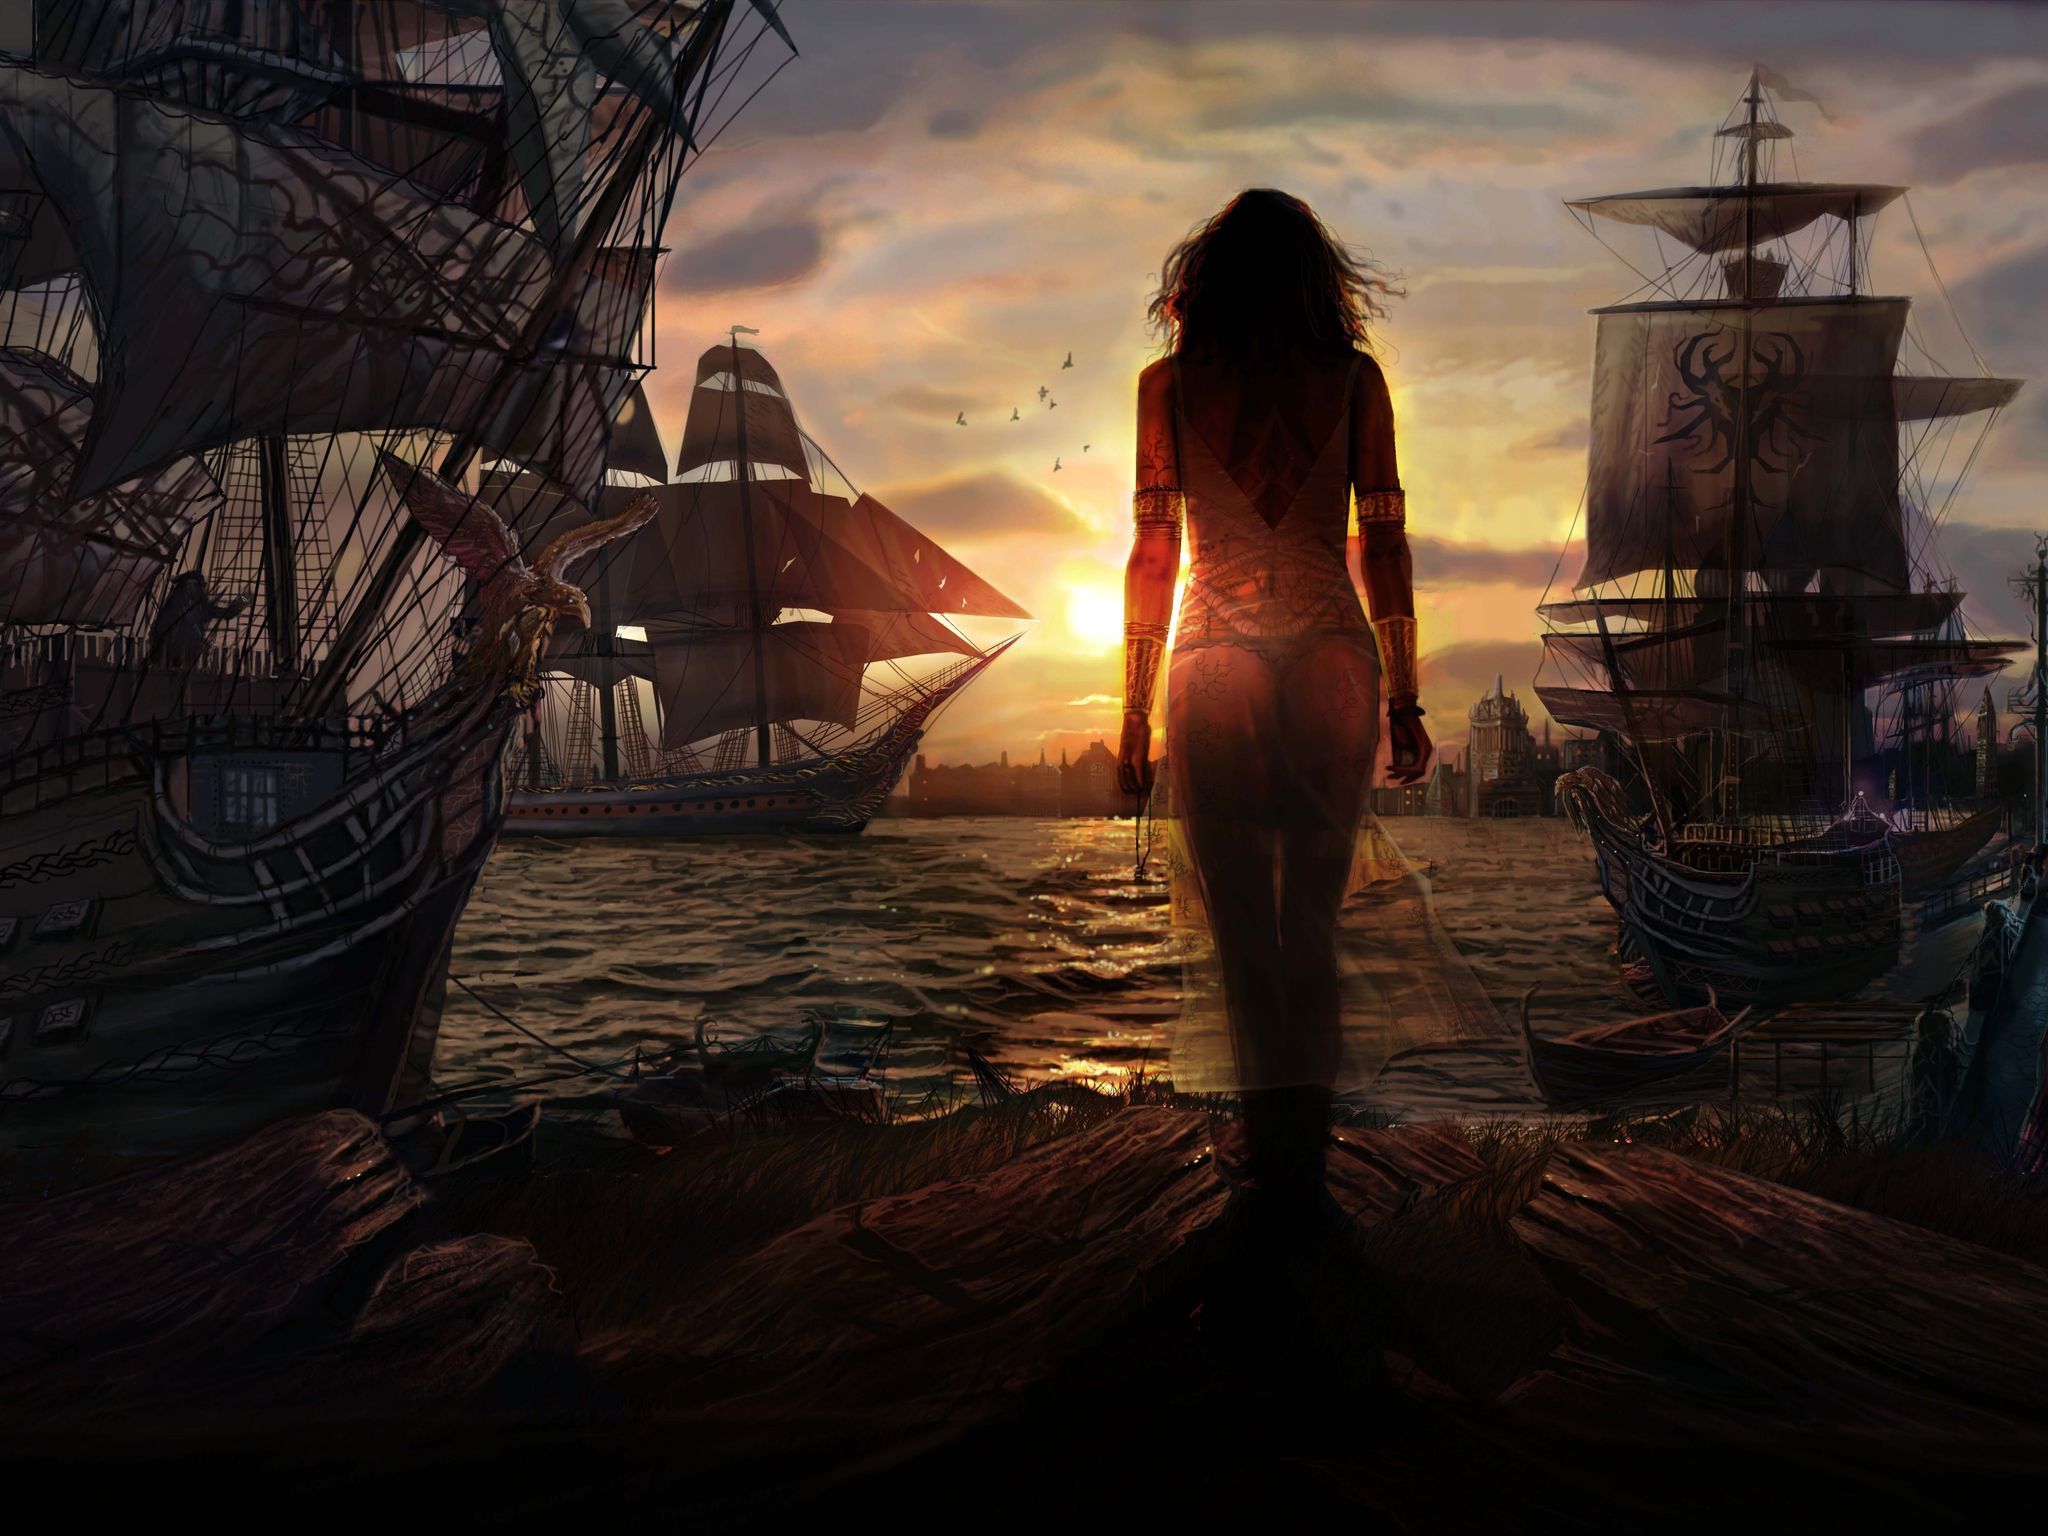 A woman in a red bikini stands on a dock looking out at a sunset with ships in the background - Pirate